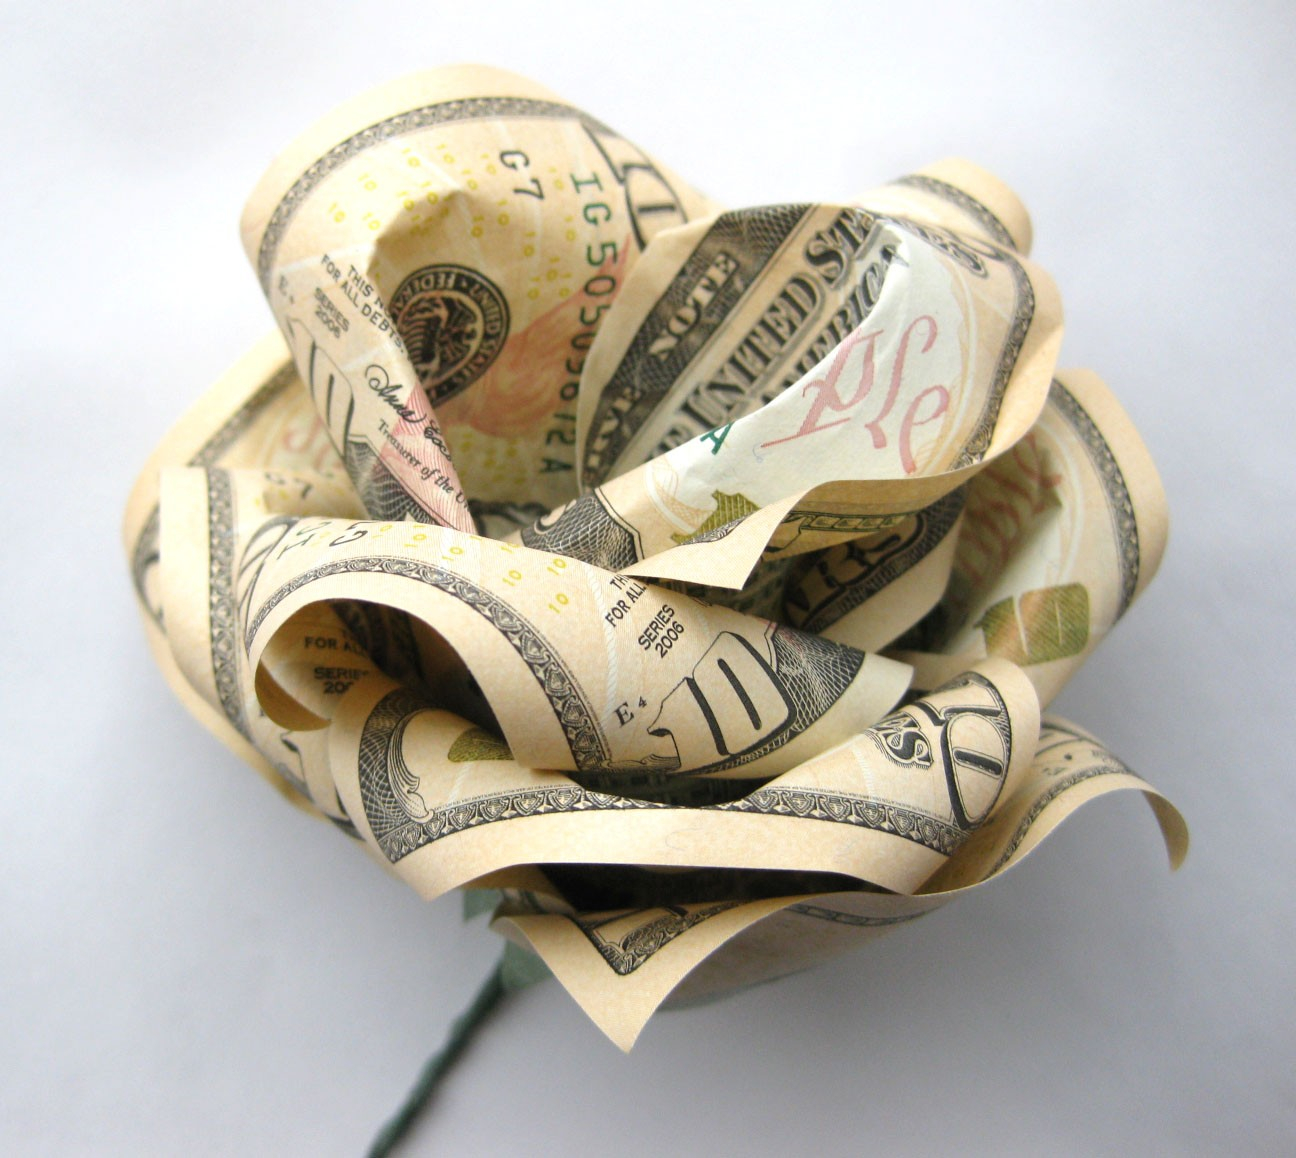 How To Make An Origami Rose Out Of Money 22 How To Make A Paper Rose Out Of Money